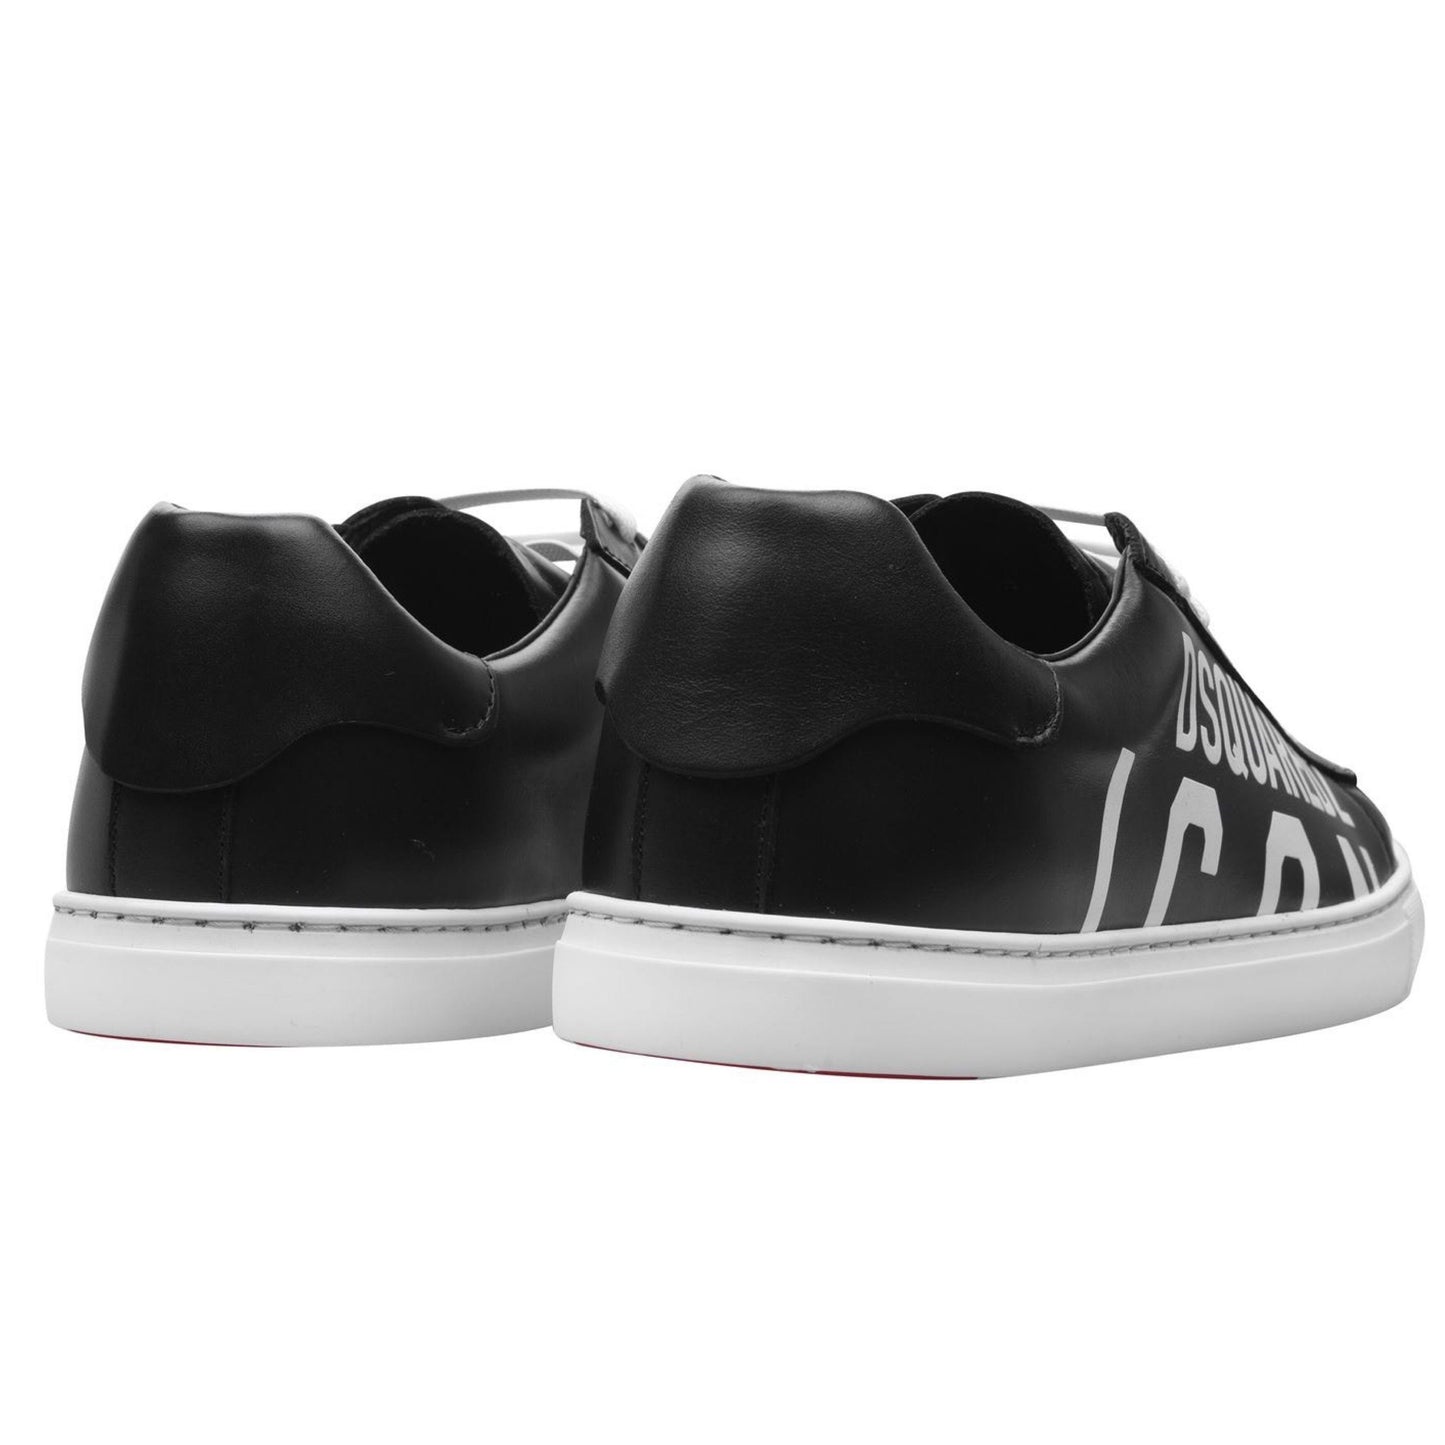 DSQUARED2 Black ICON Trainers Trainers DSQUARED2 